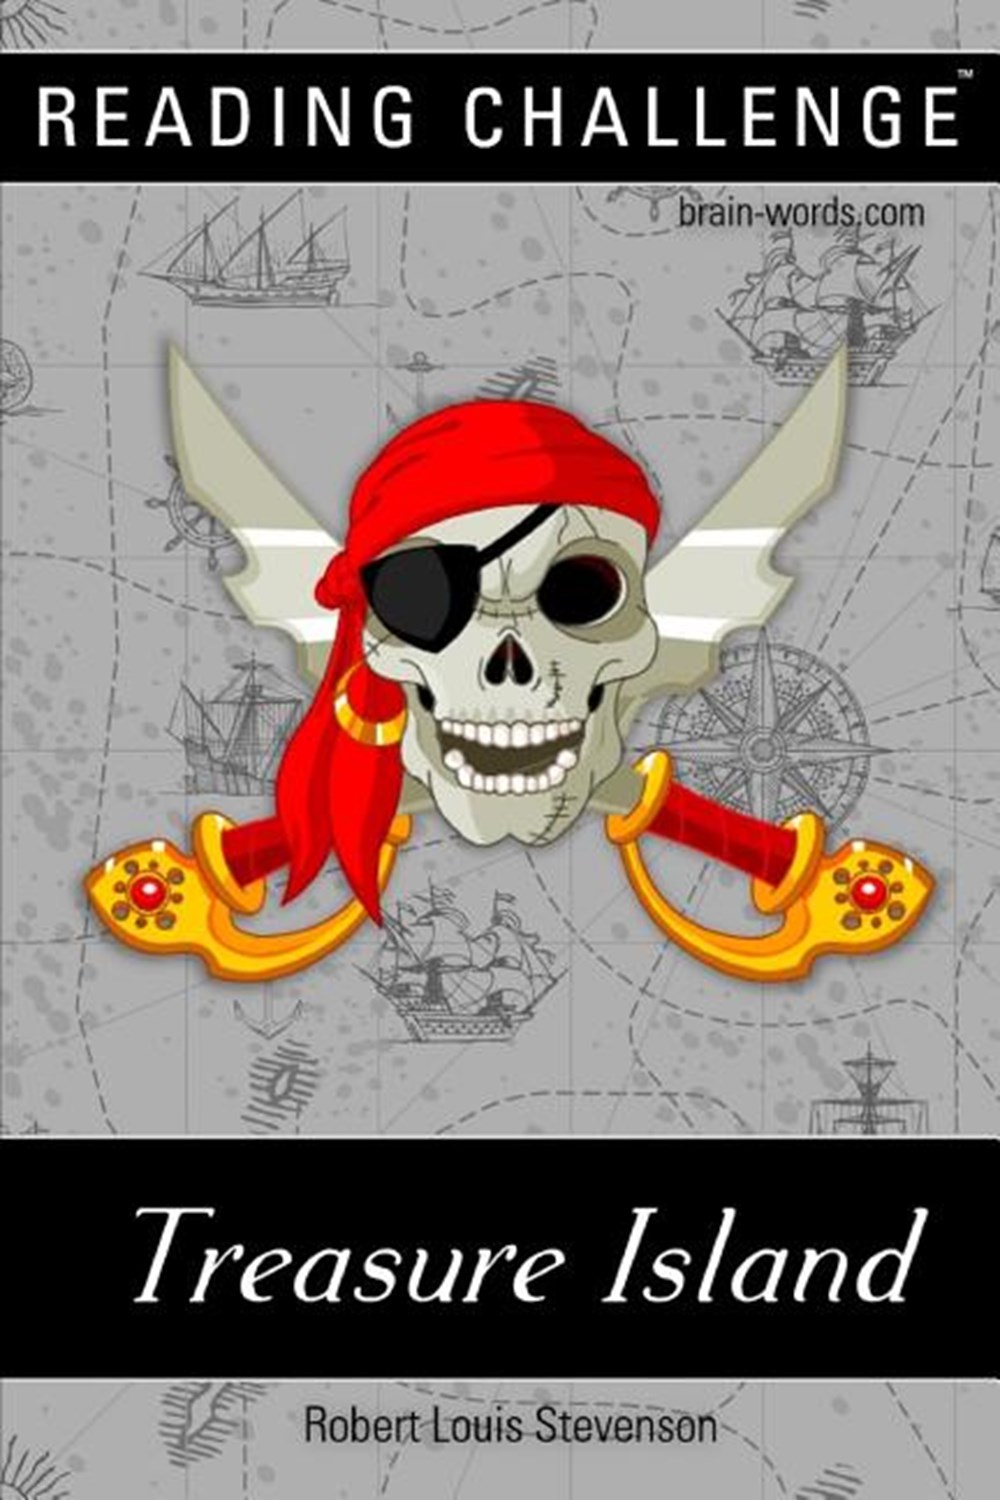 READING CHALLENGE - Treasure Island (Illustrated): Read this book in one week, two weeks or one mont